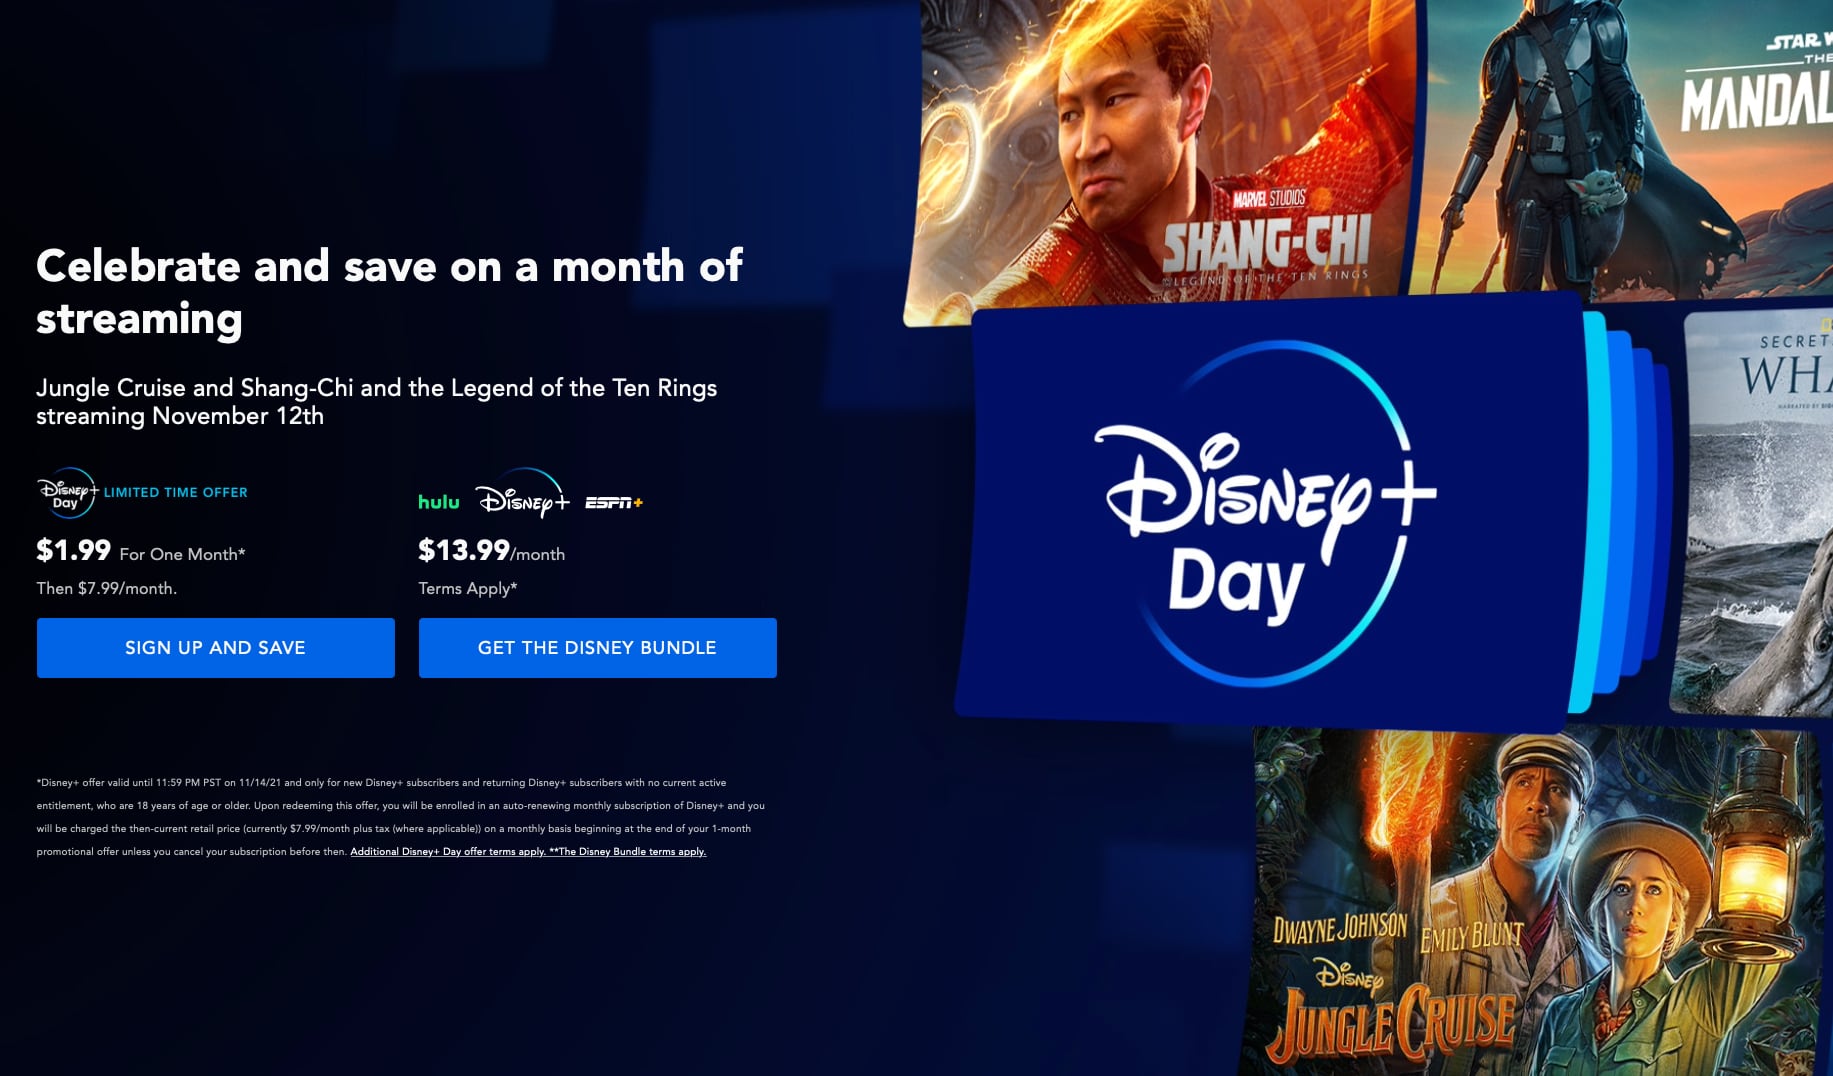 A screenshot of the Disney+ homepage showing a deal giving an eighty percent discount for one month of the service for a limited time